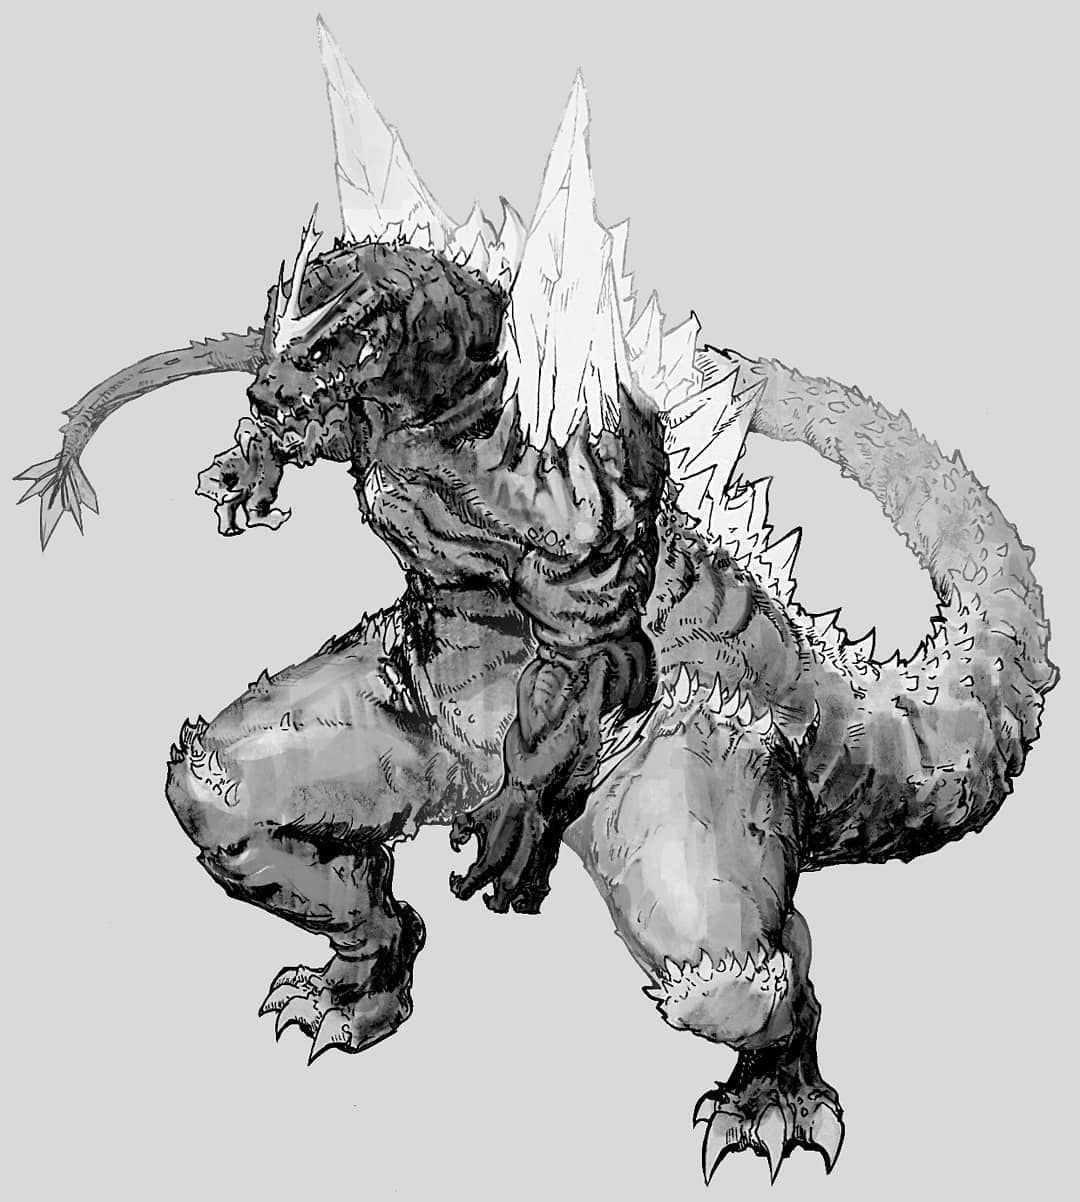 Kevin Chapman On Instagram “here Is Sketch Of Space Godzilla For